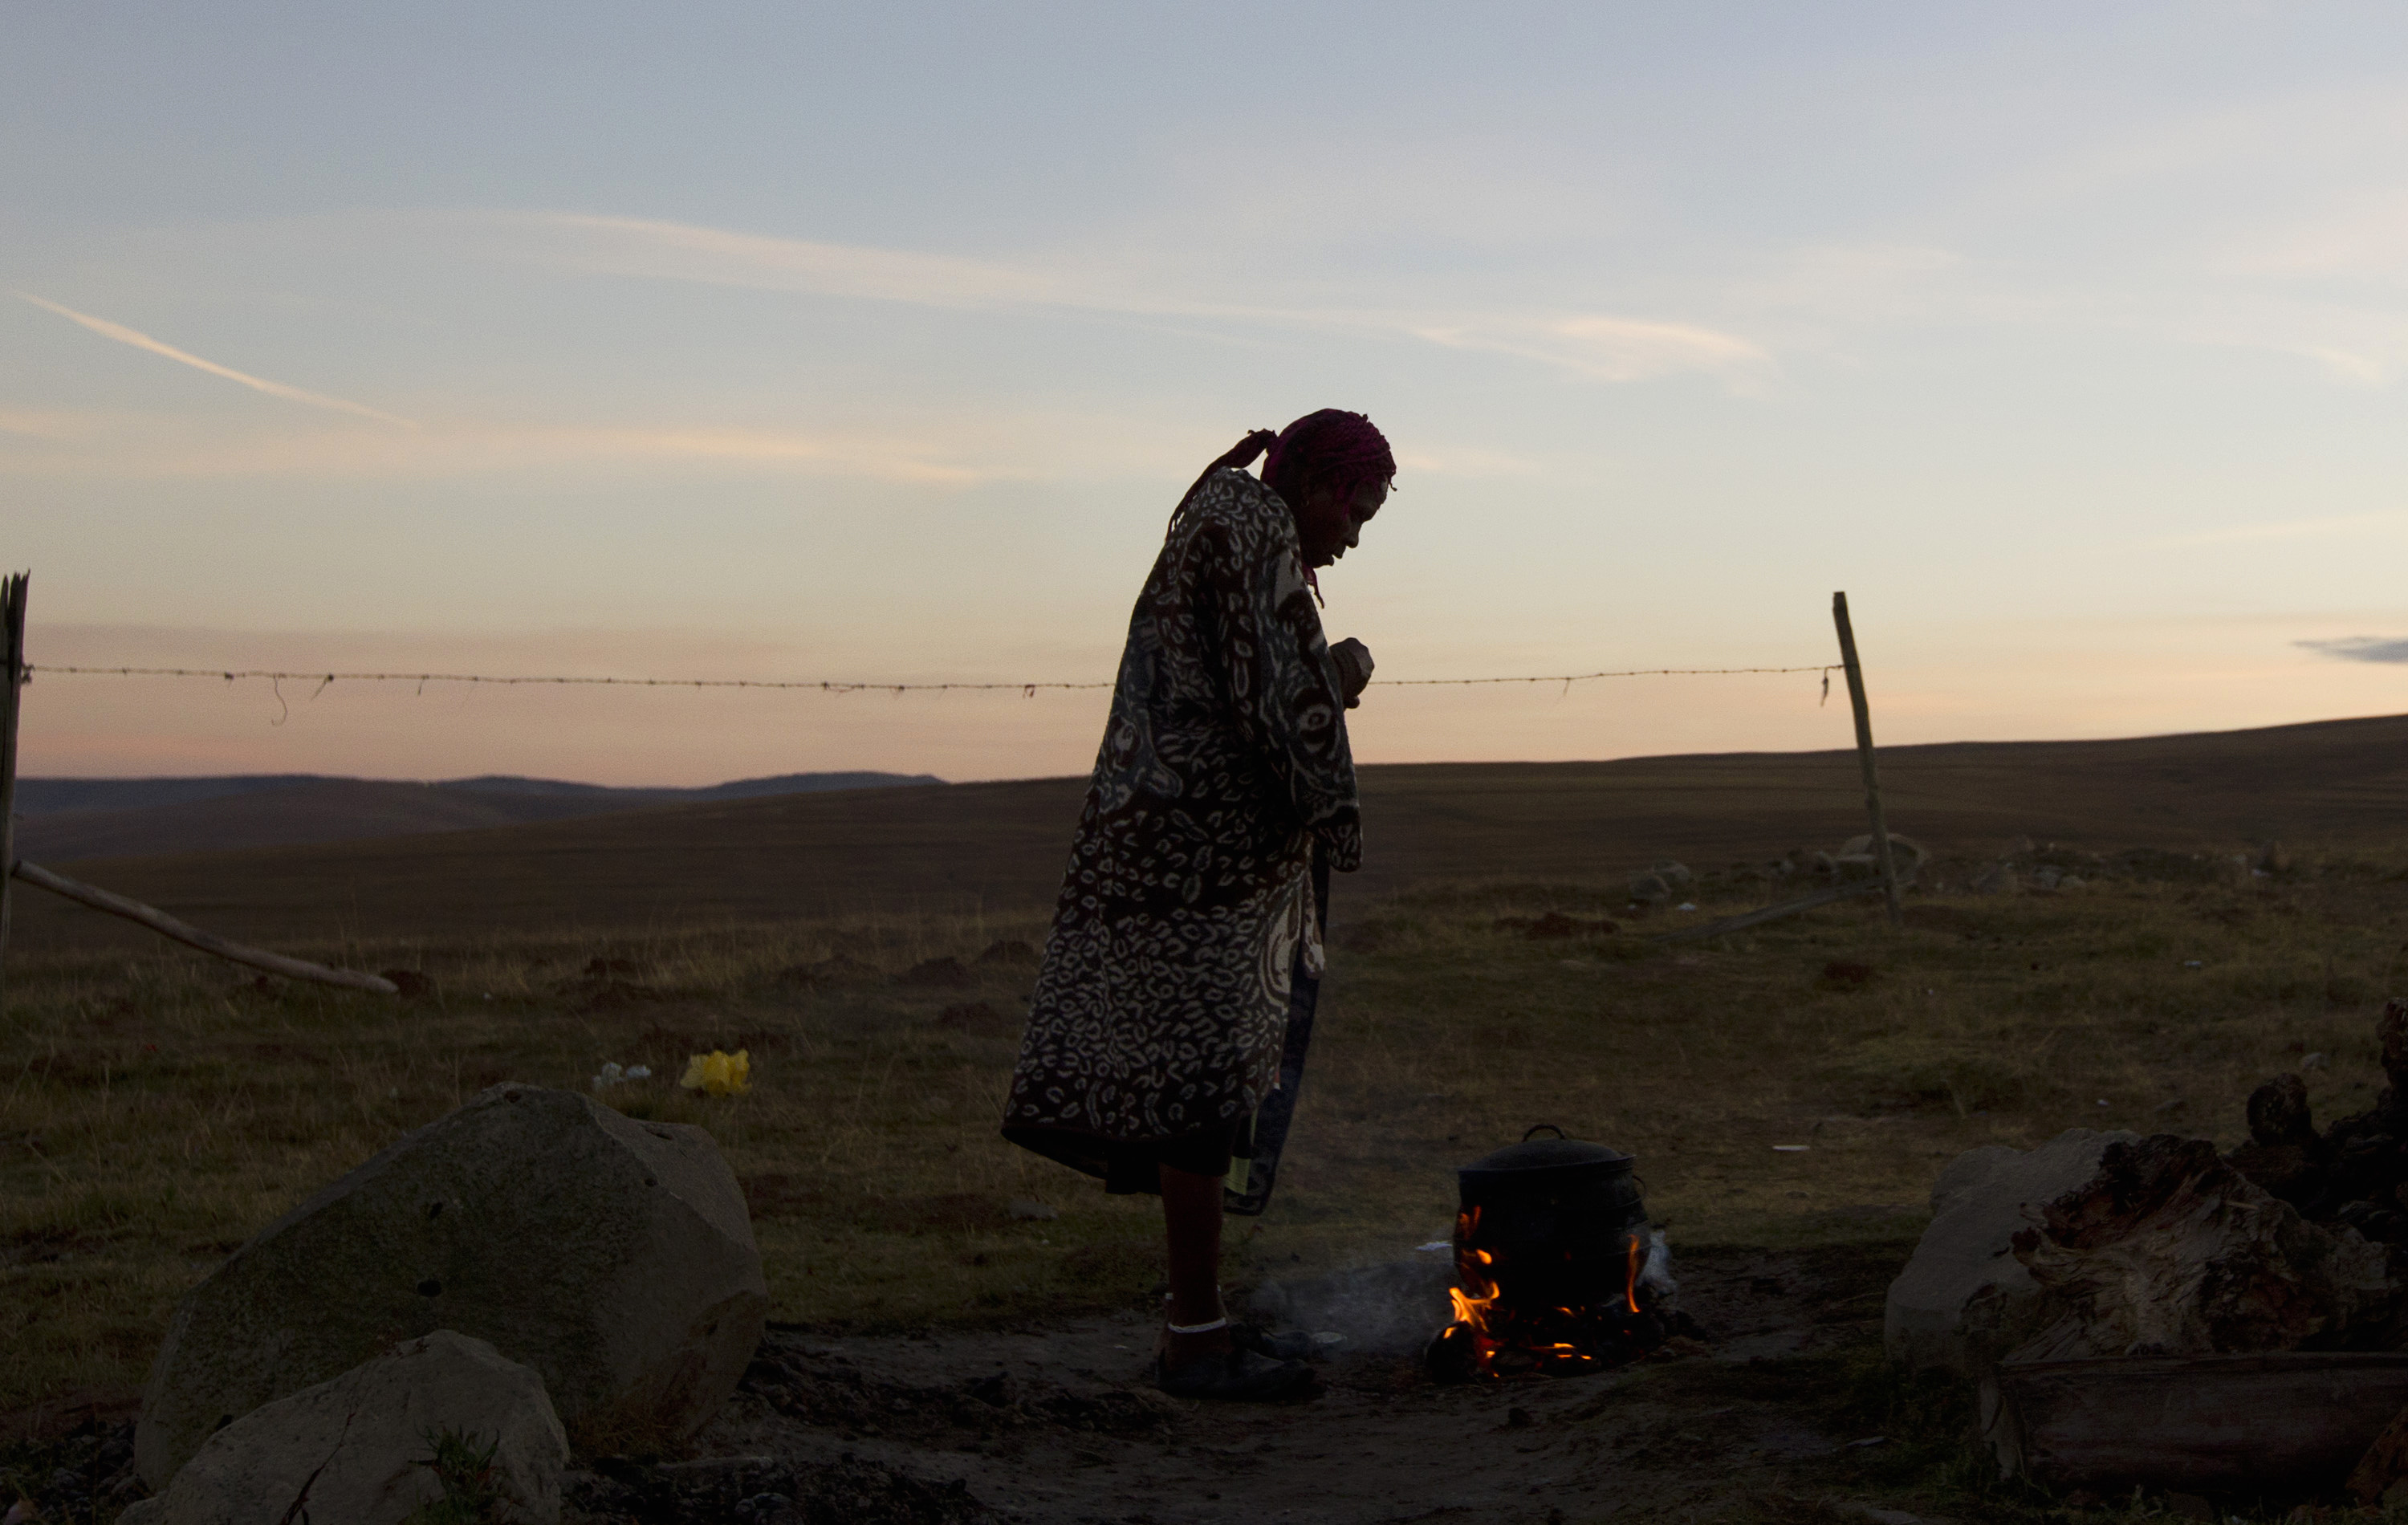 A woman warms water on an open fire near the home of former South African President Nelson Mandela's house in Qunu